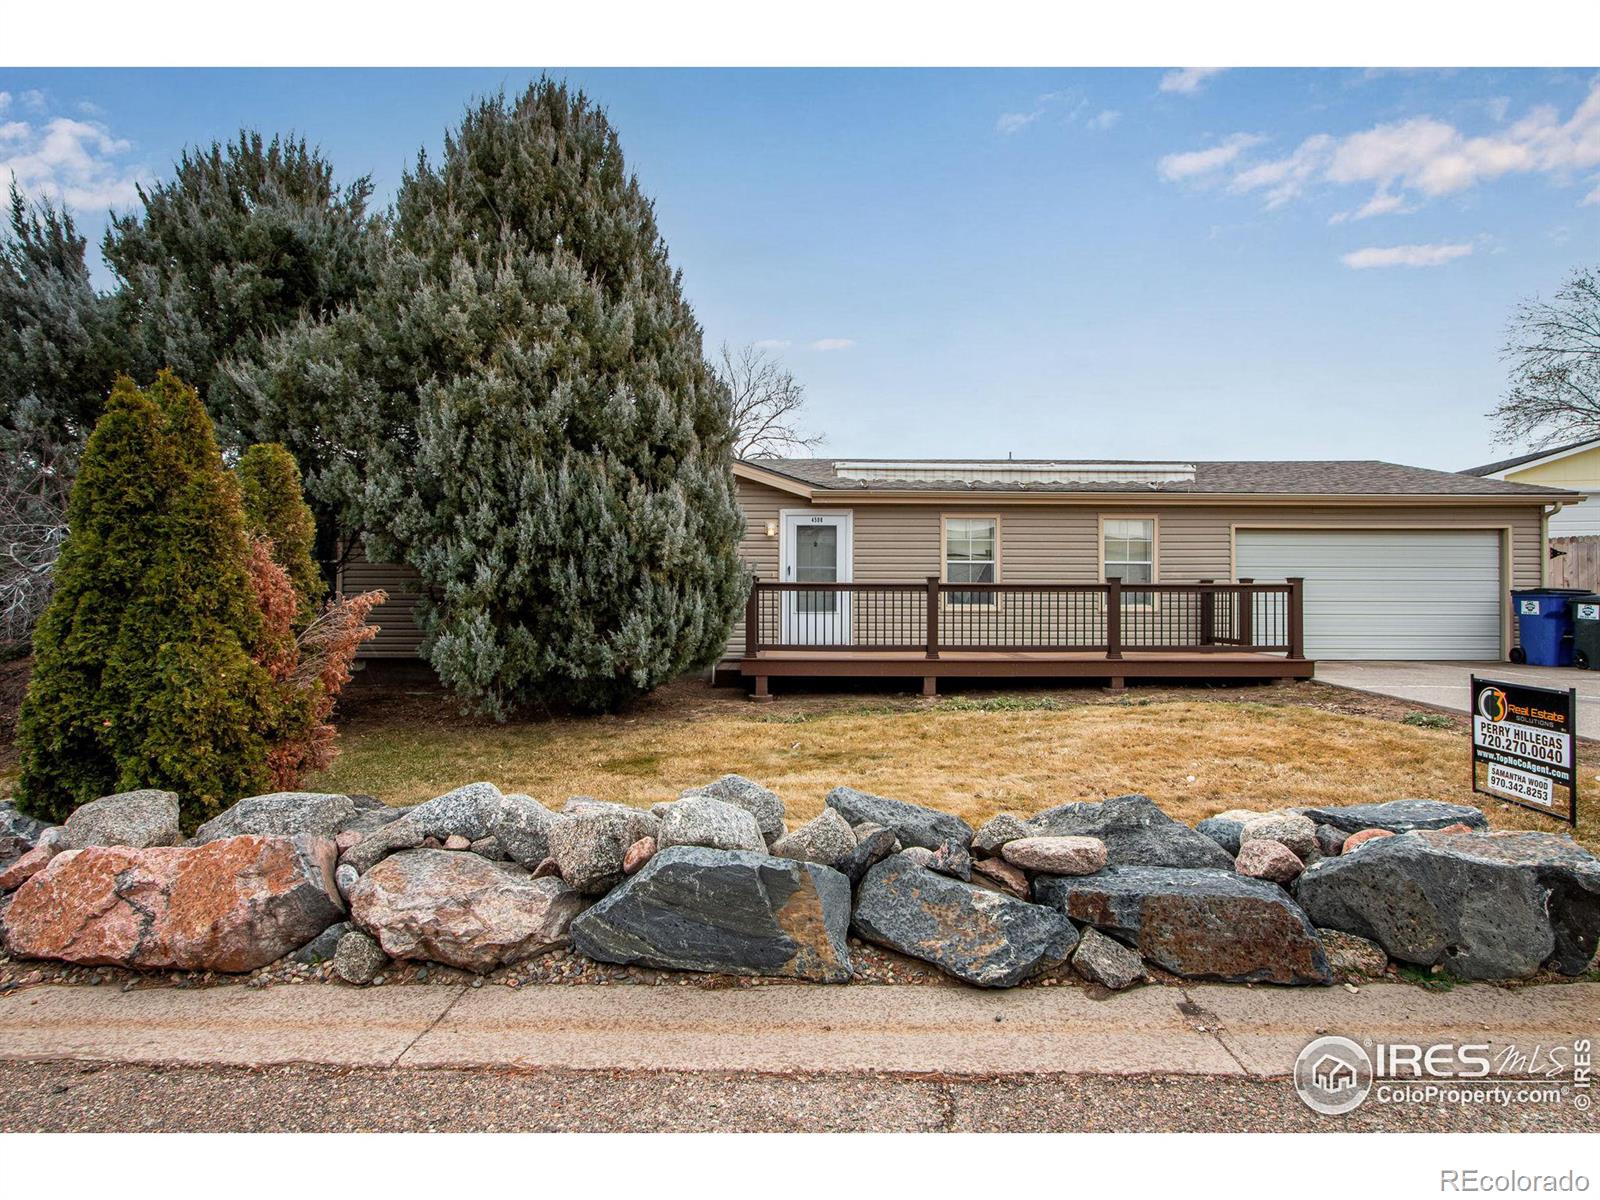 4508 s shenandoah street, Greeley sold home. Closed on 2024-03-27 for $280,000.